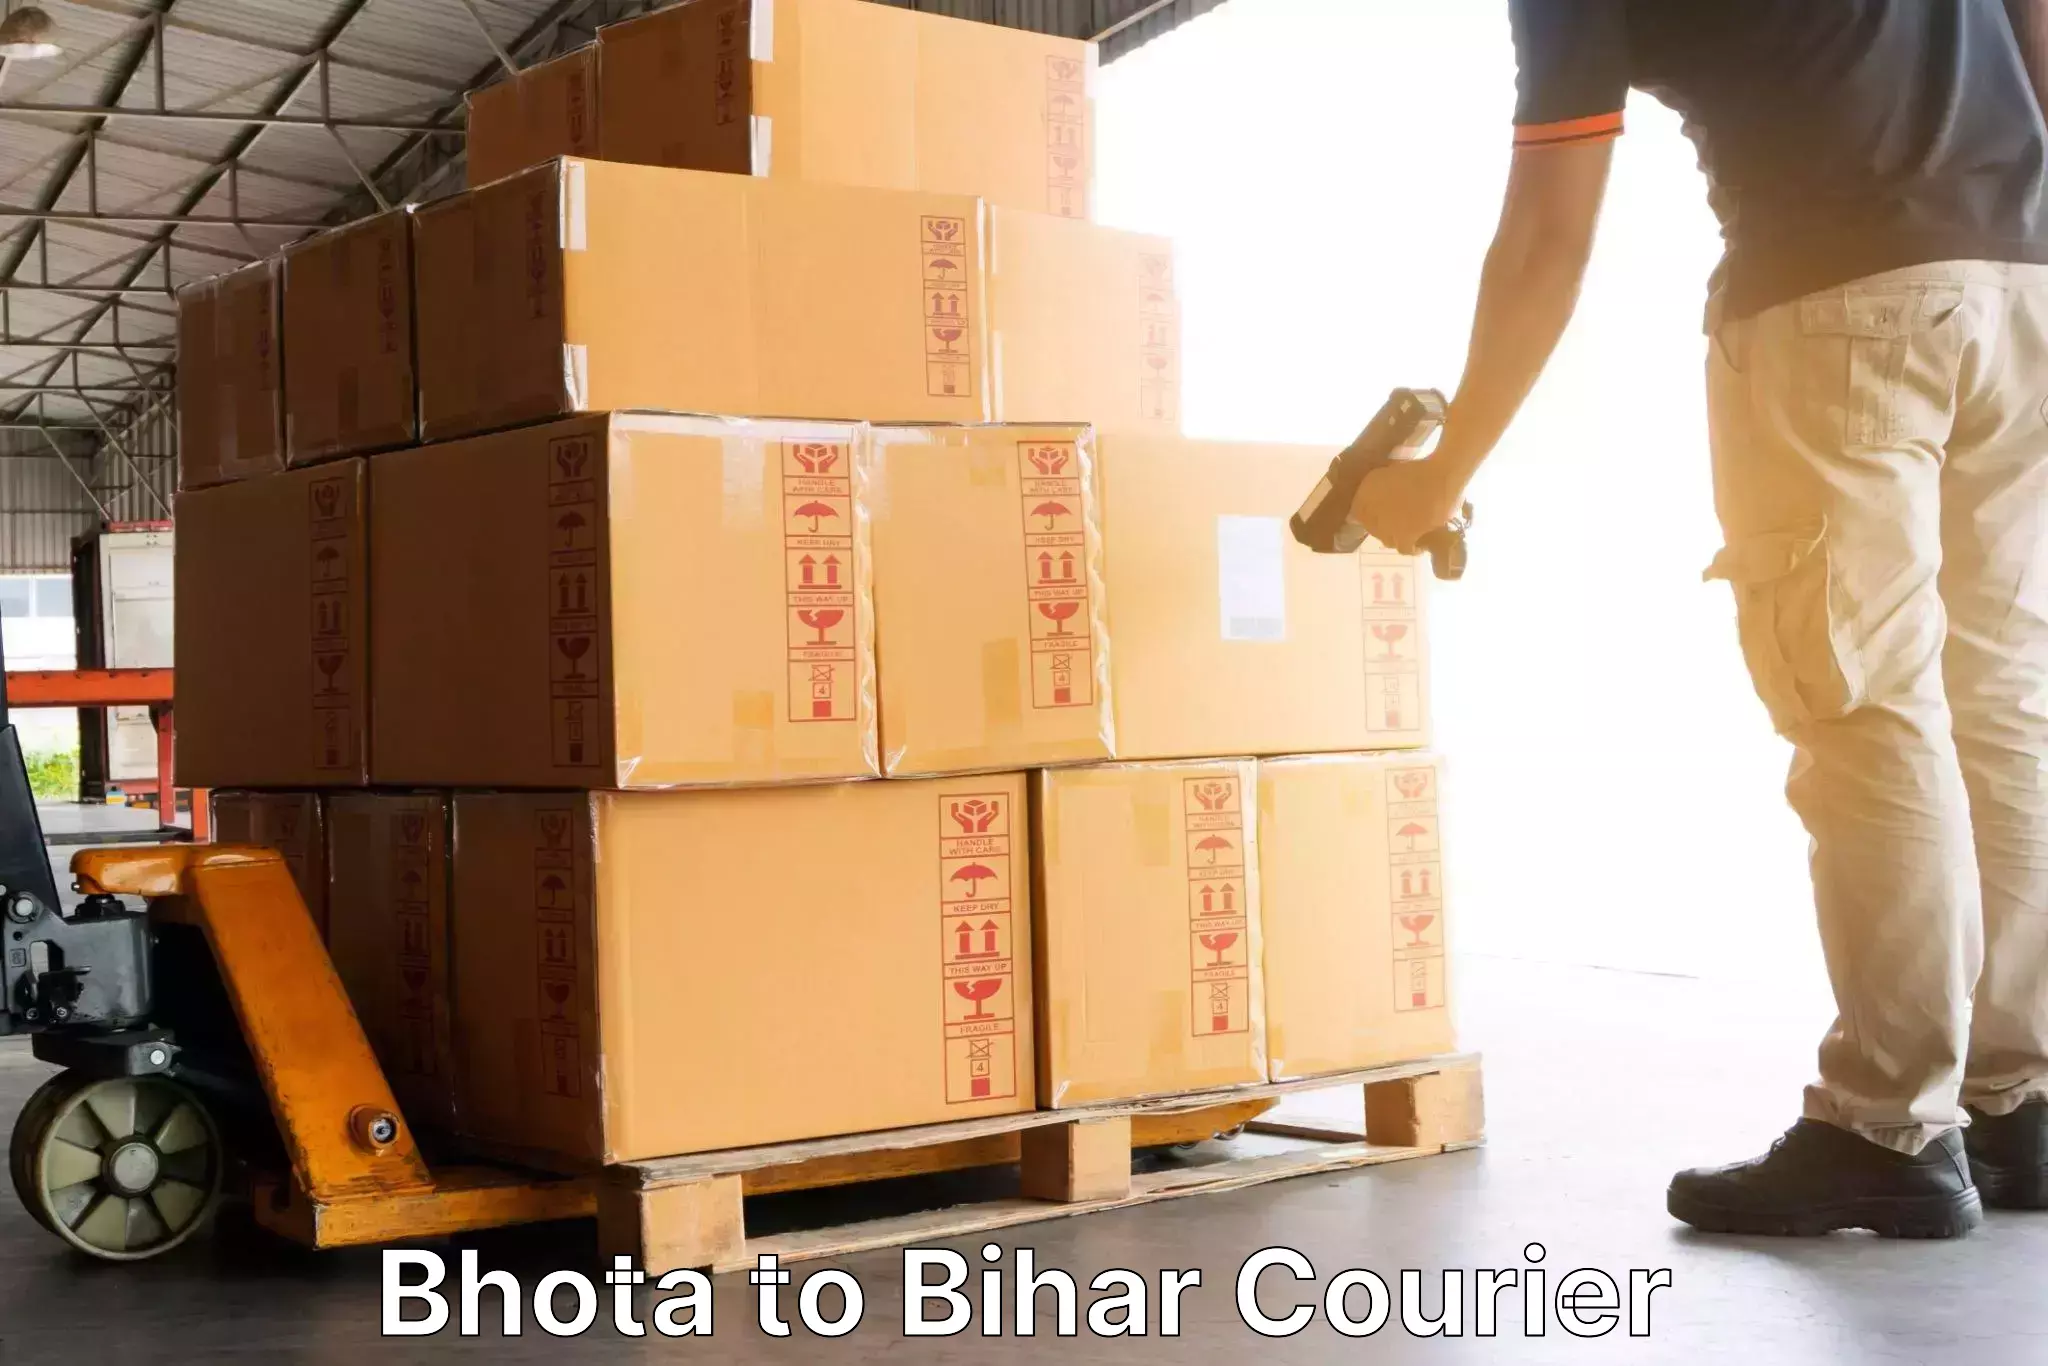 Efficient shipping operations Bhota to Biraul